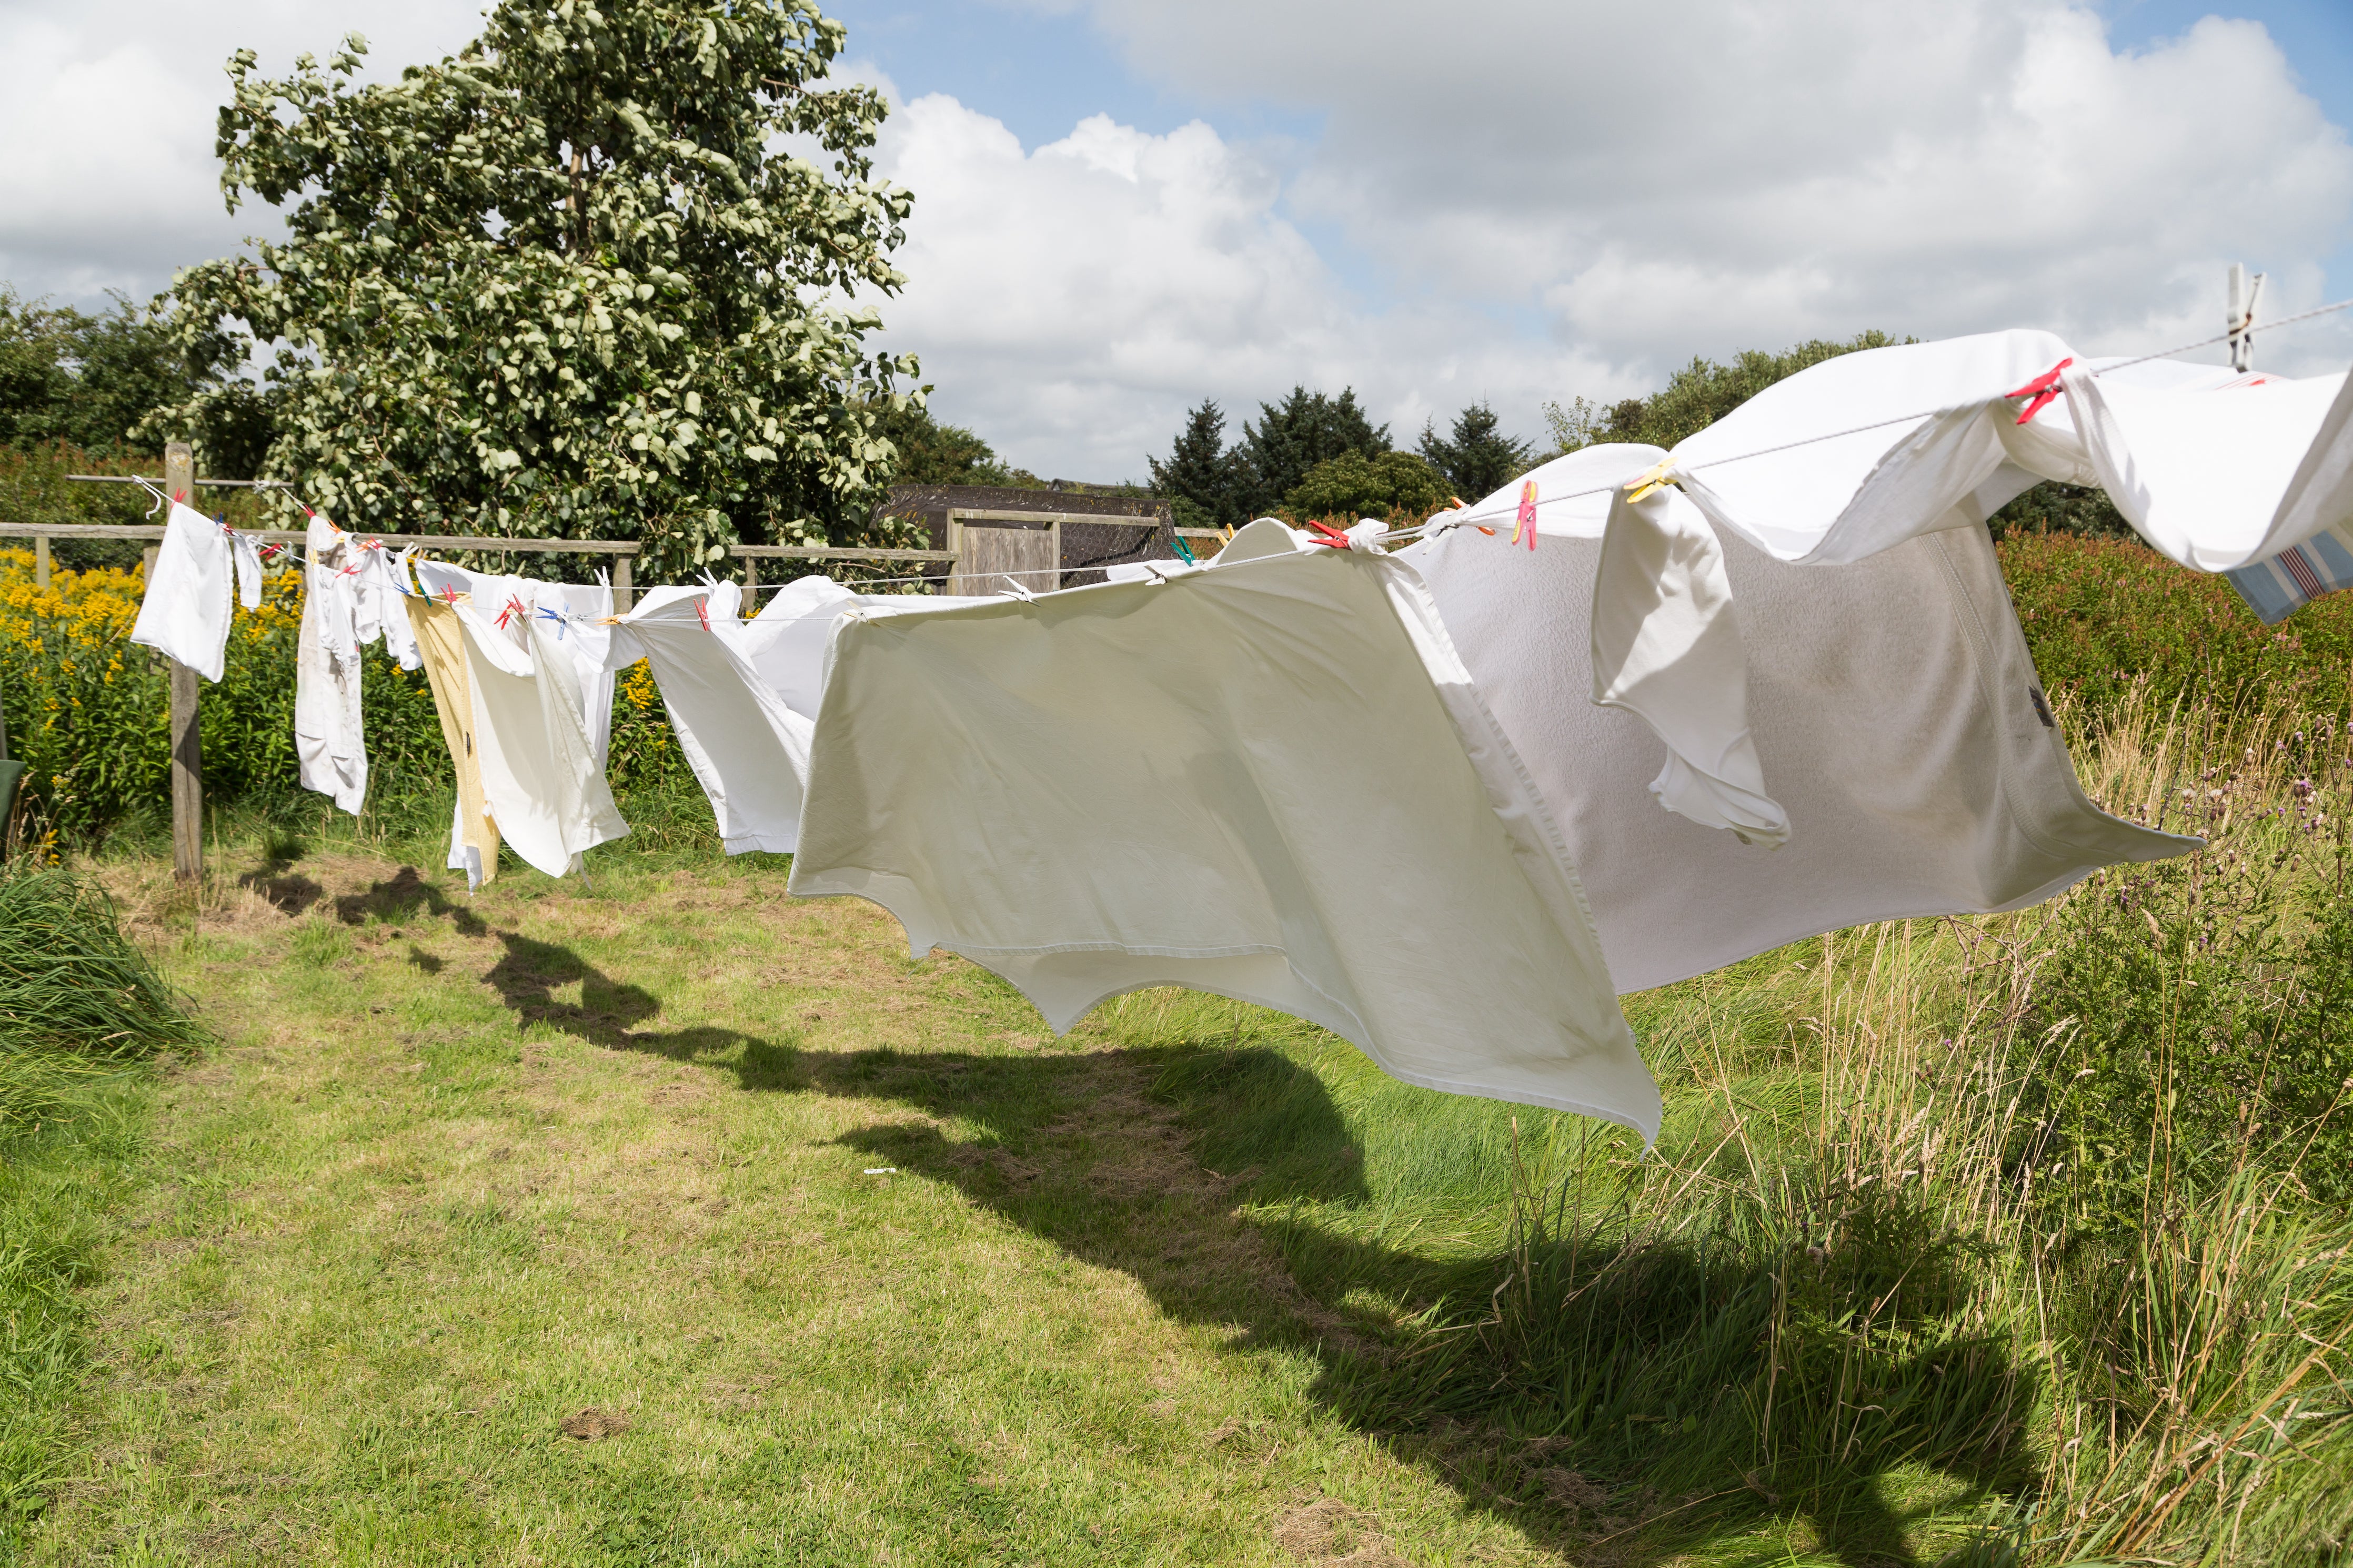 Getting rid of formaldehyde from clothes by leaving them in the fresh air